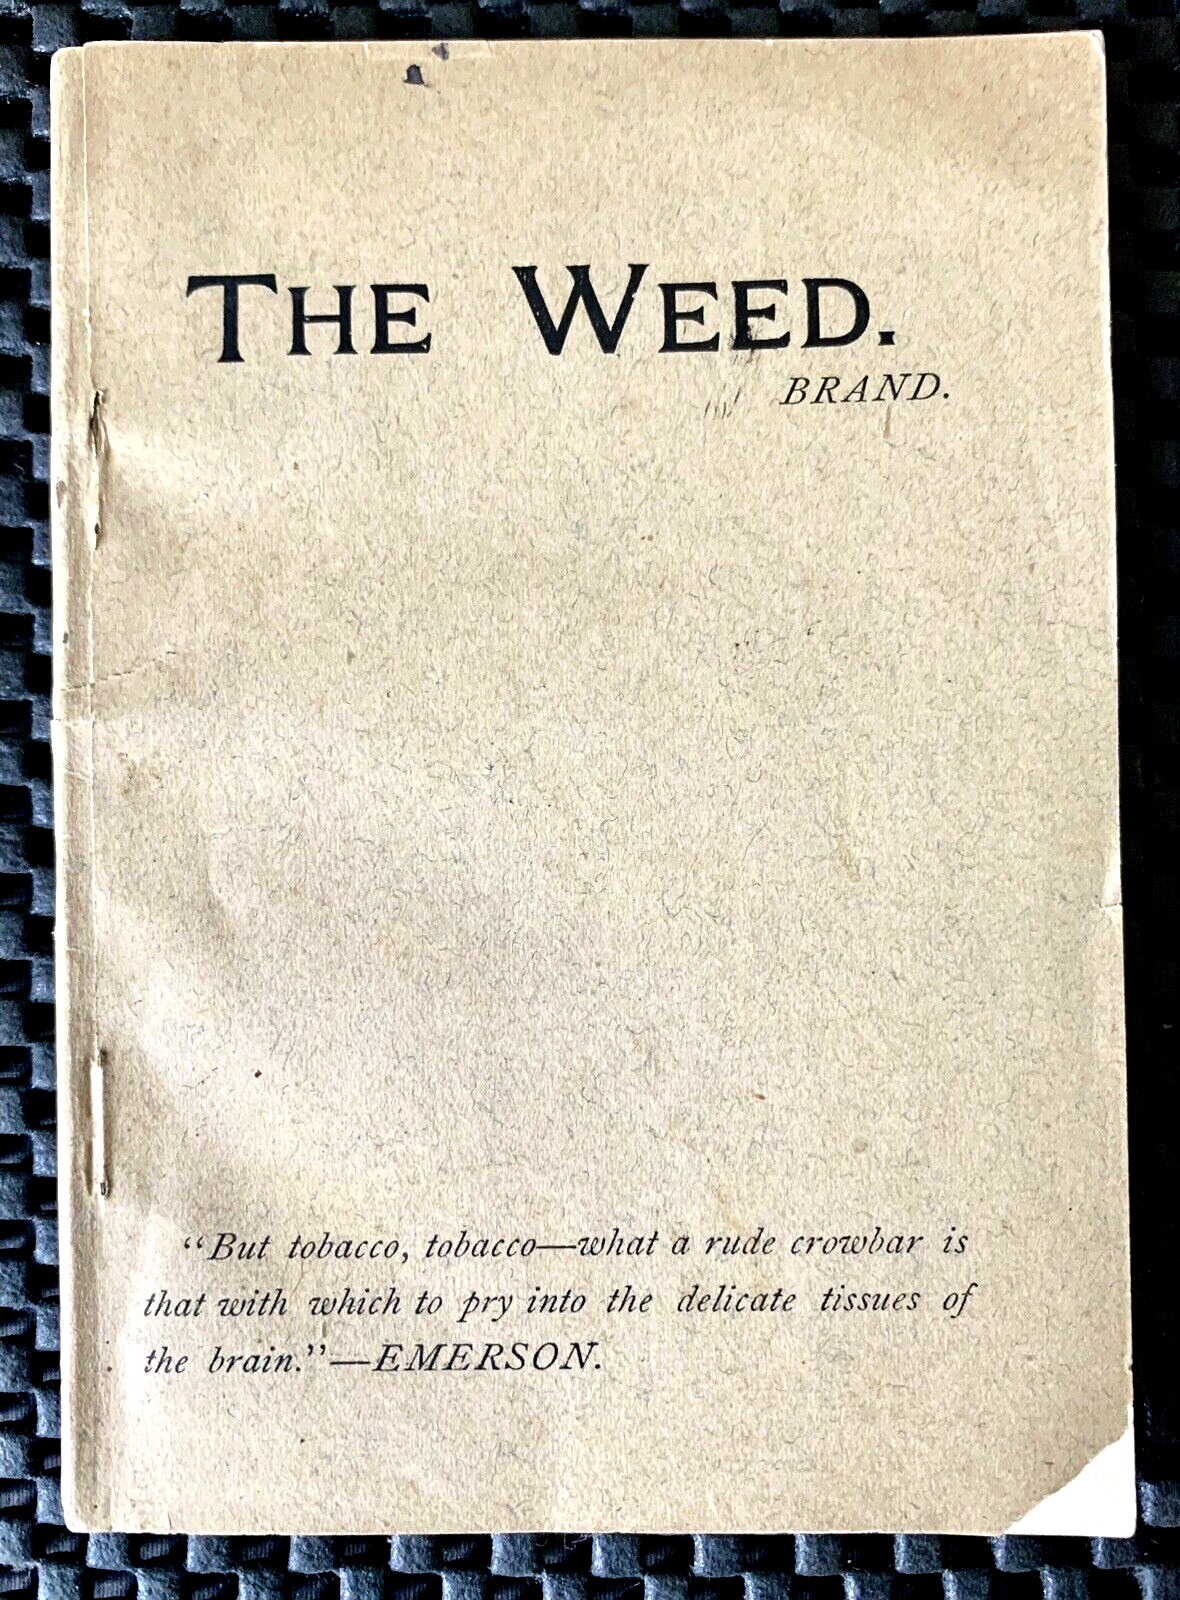 THE WEED BY JAMES BRAND PASTOR TOBACCO BOOKLET